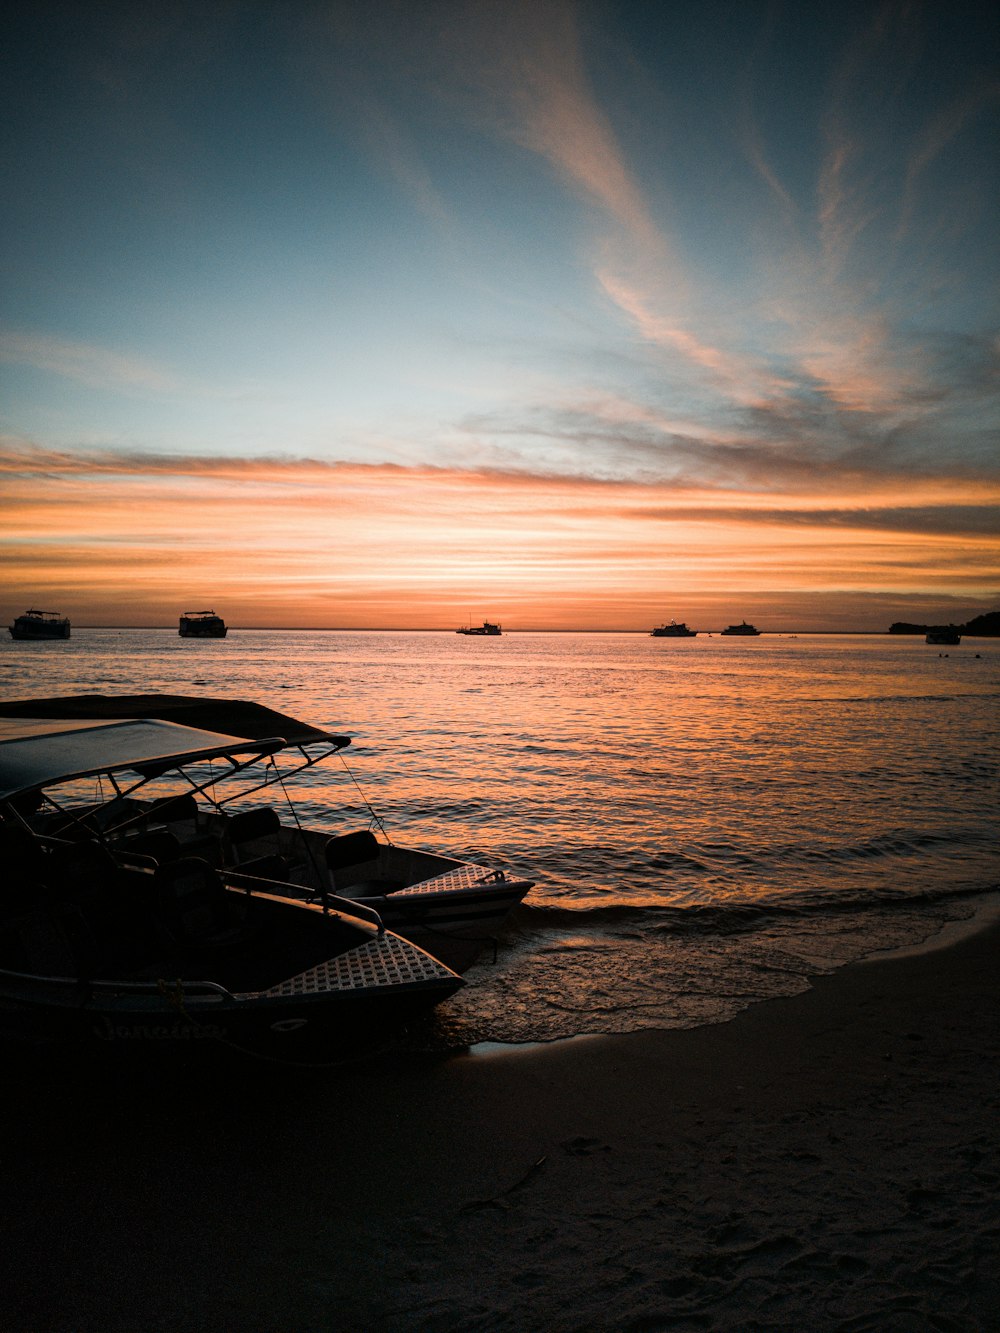 white and black boat on sea shore during sunset